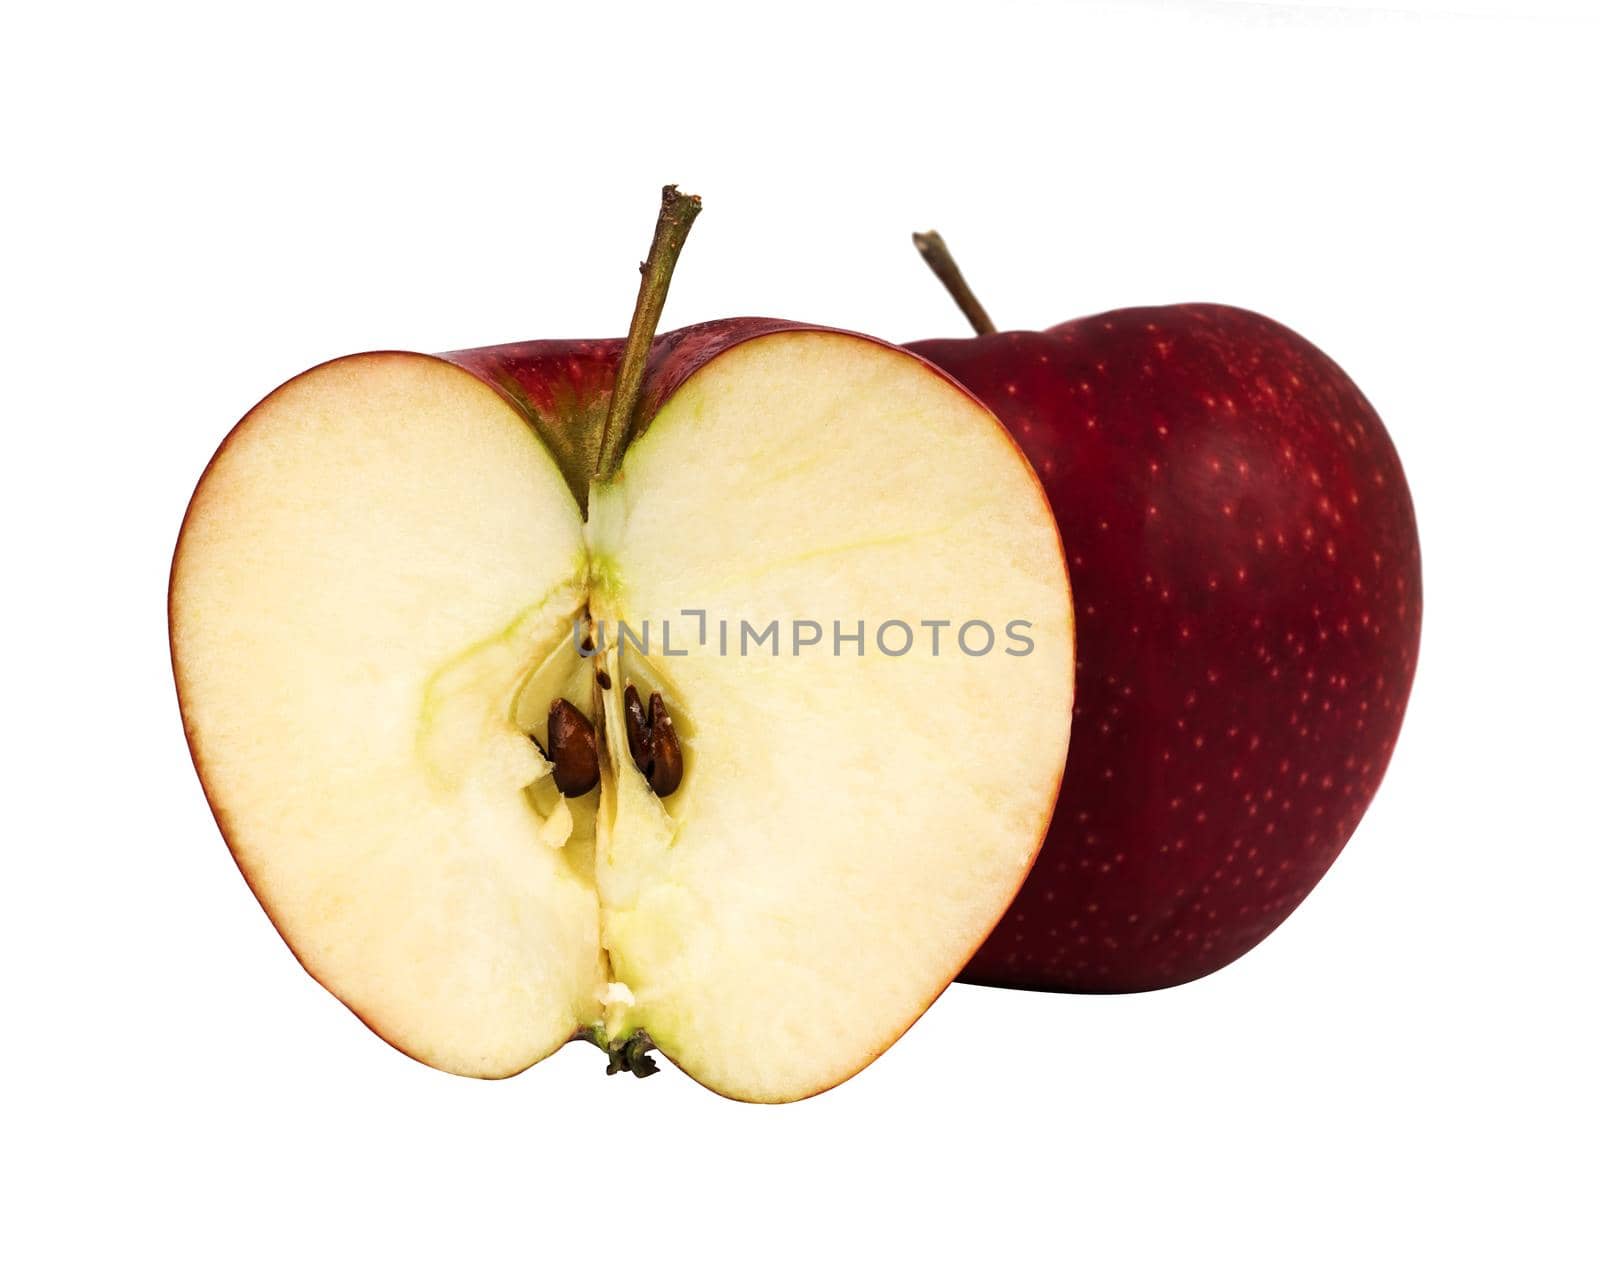 Ripe red apple and half apple on white background